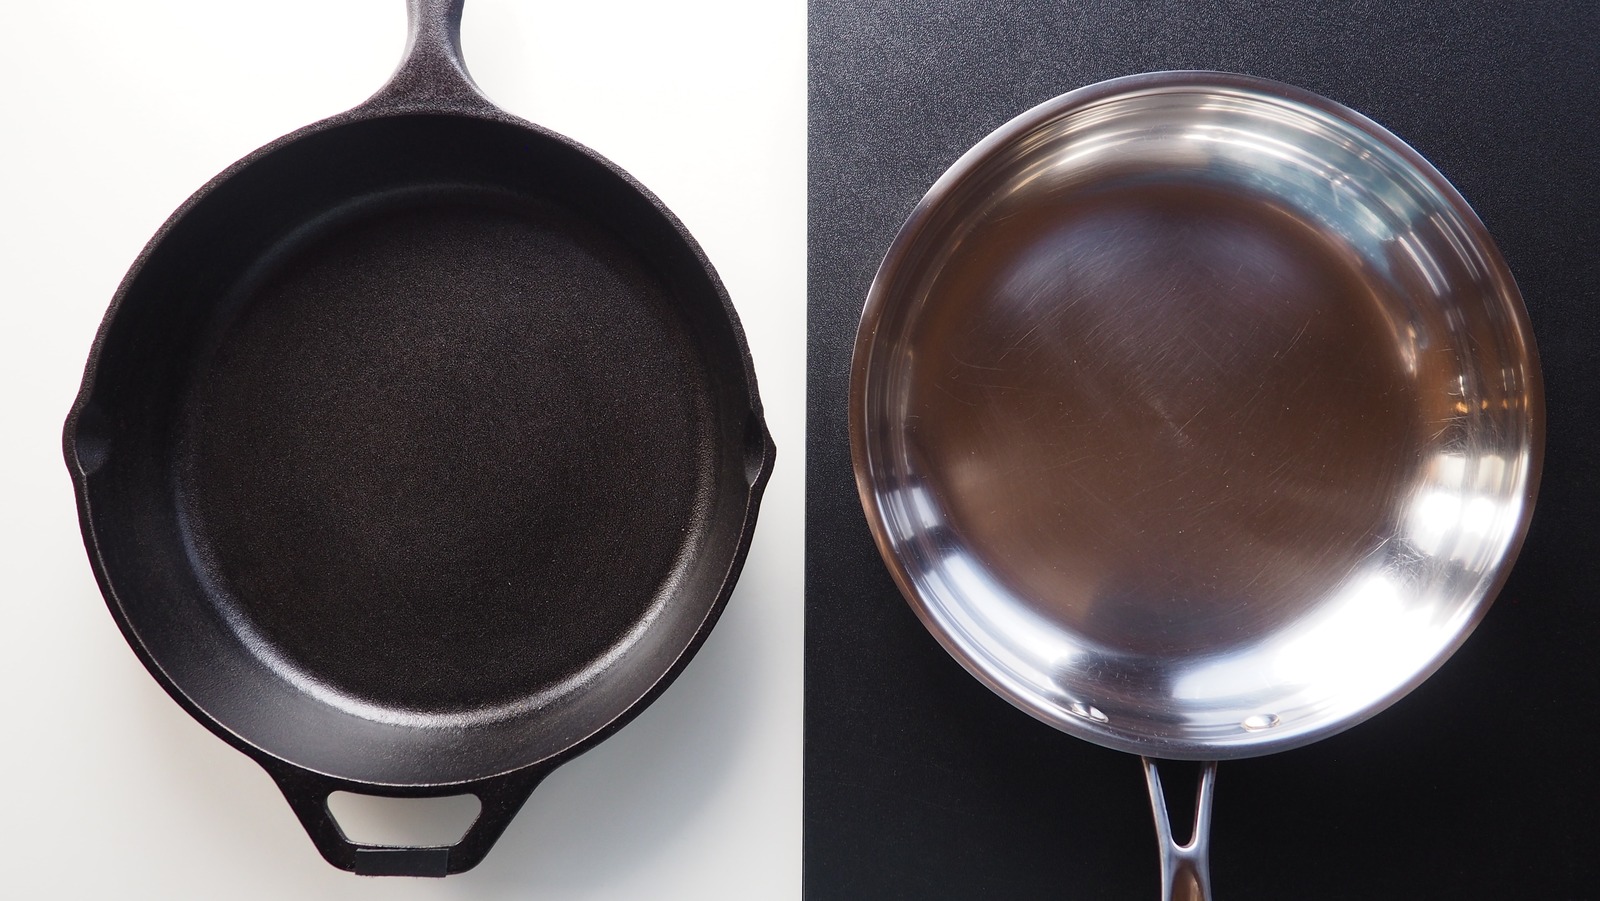 Cast-Iron Cookware: Benefits of Traditional vs. Enameled